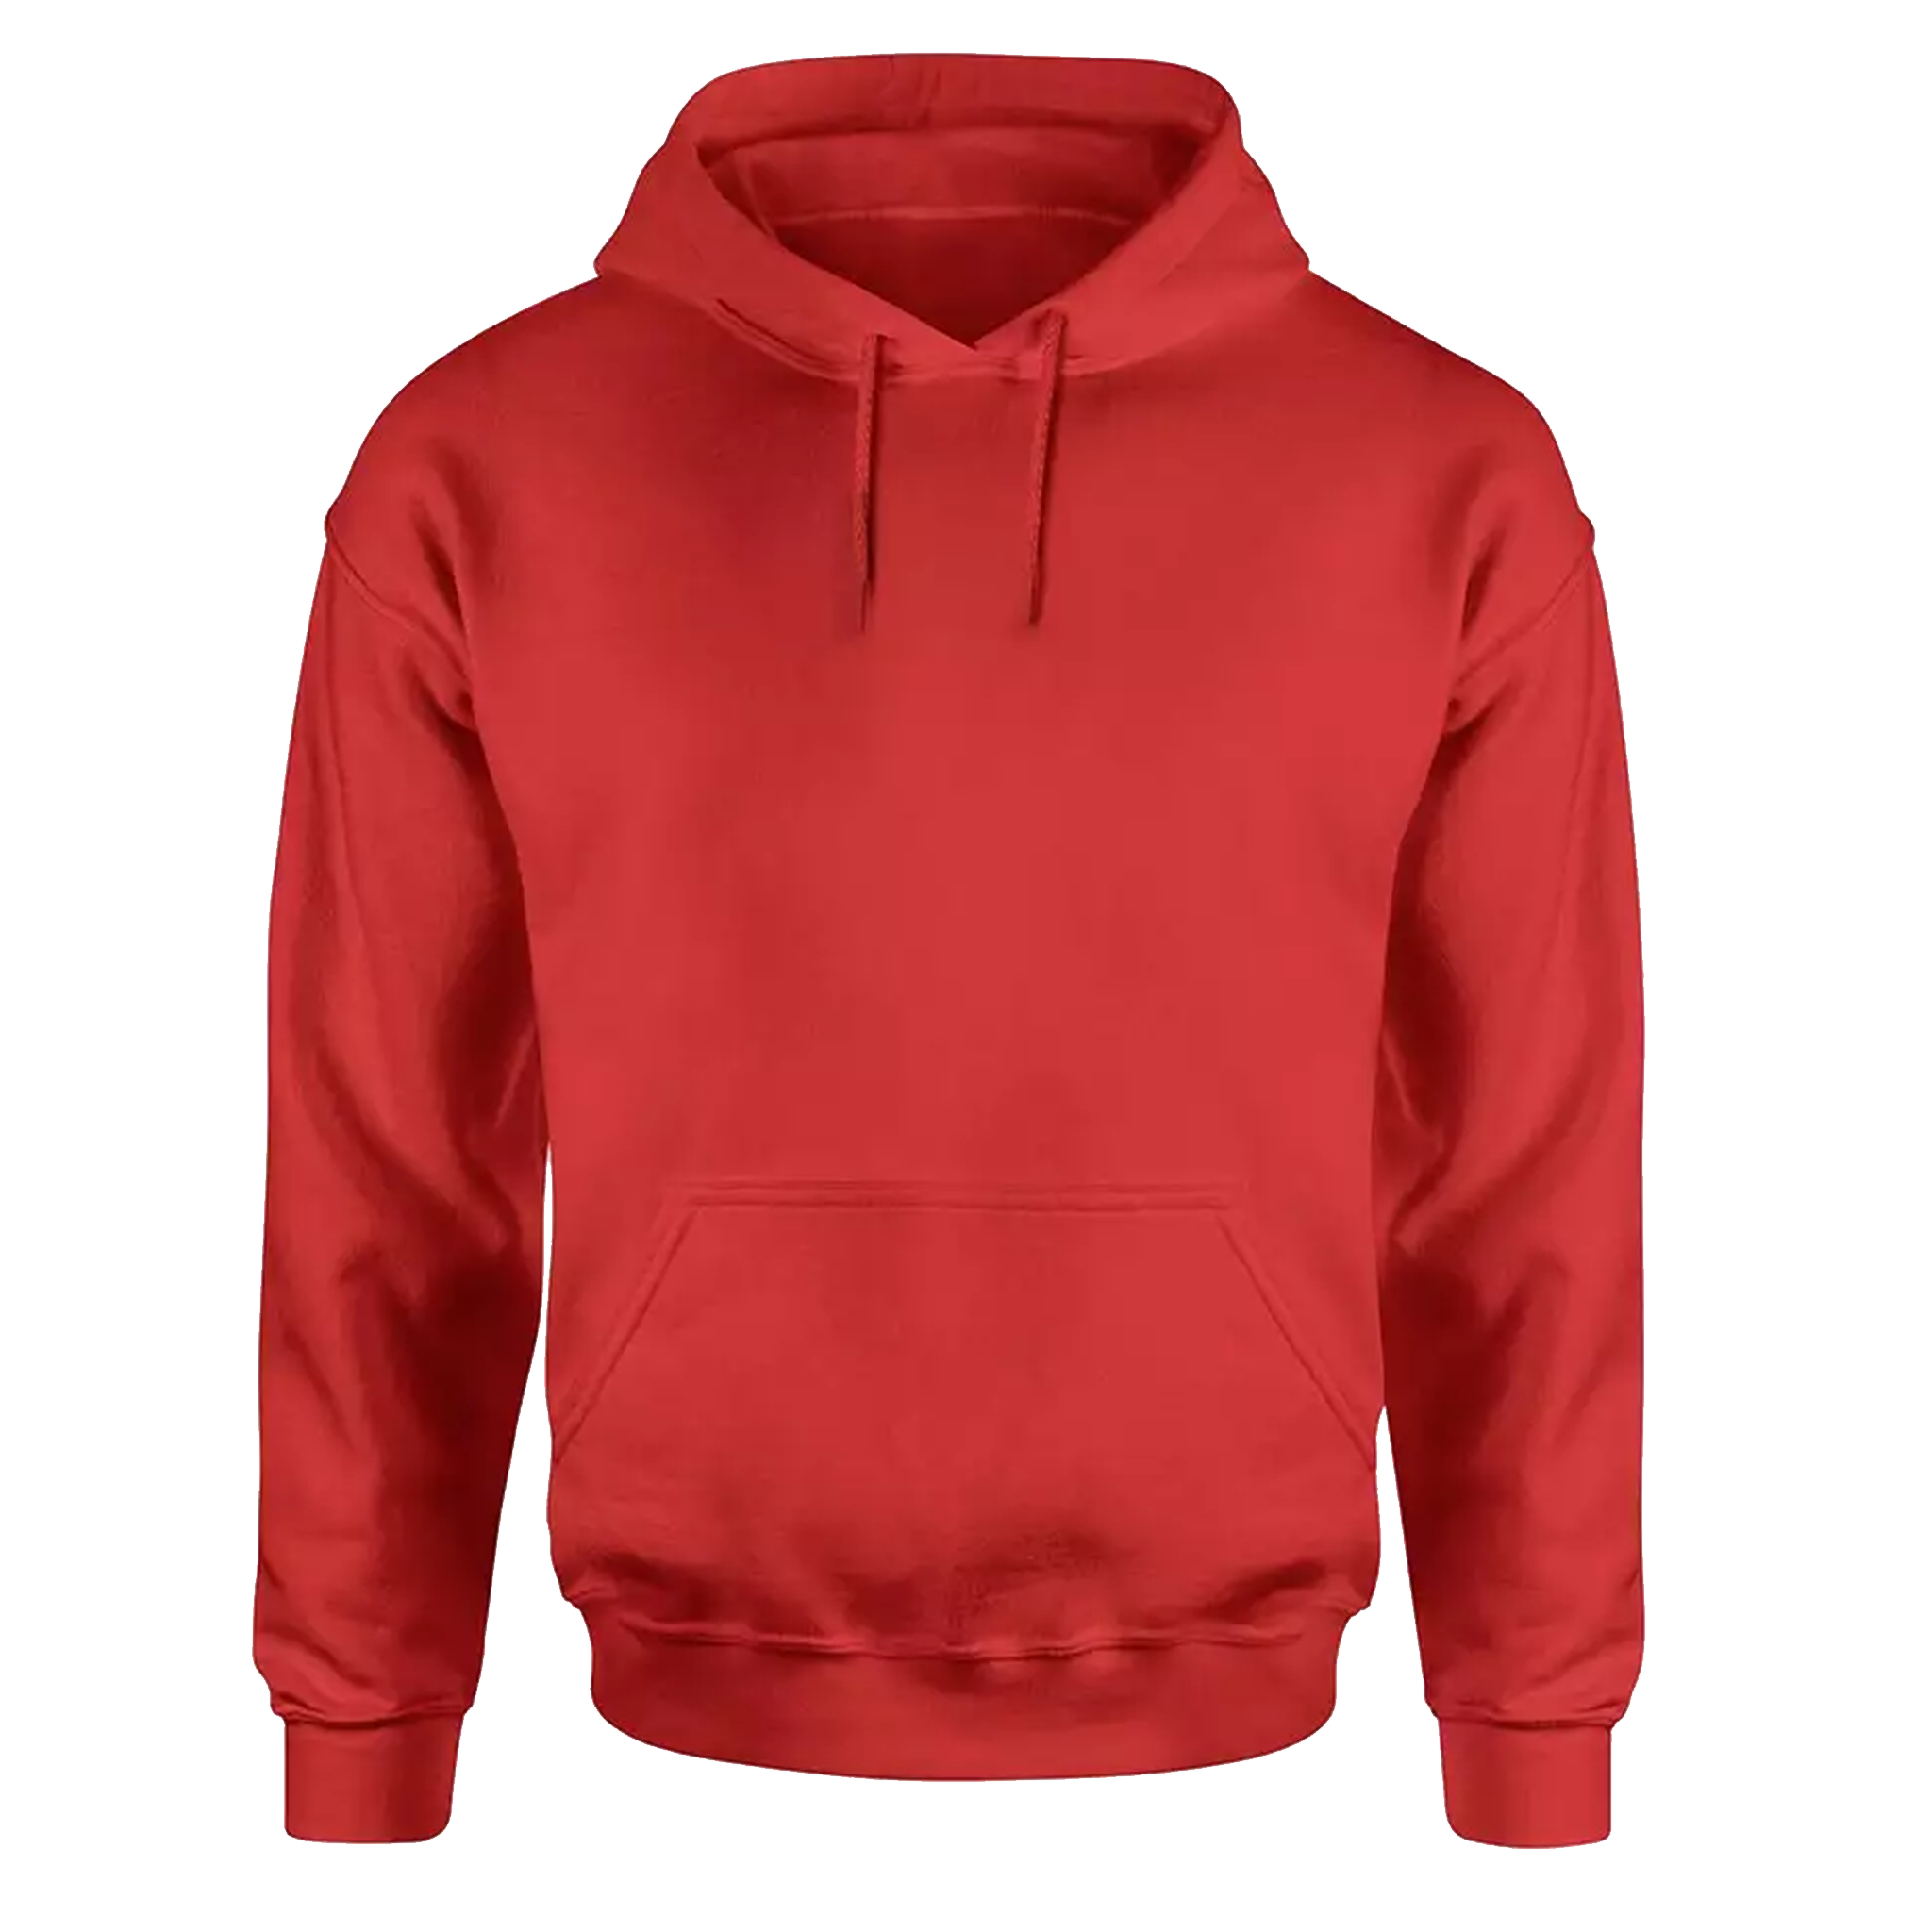 Reflections Apparel Fleece Hoodie - Adult Unisex Sizing S-3XL - Red